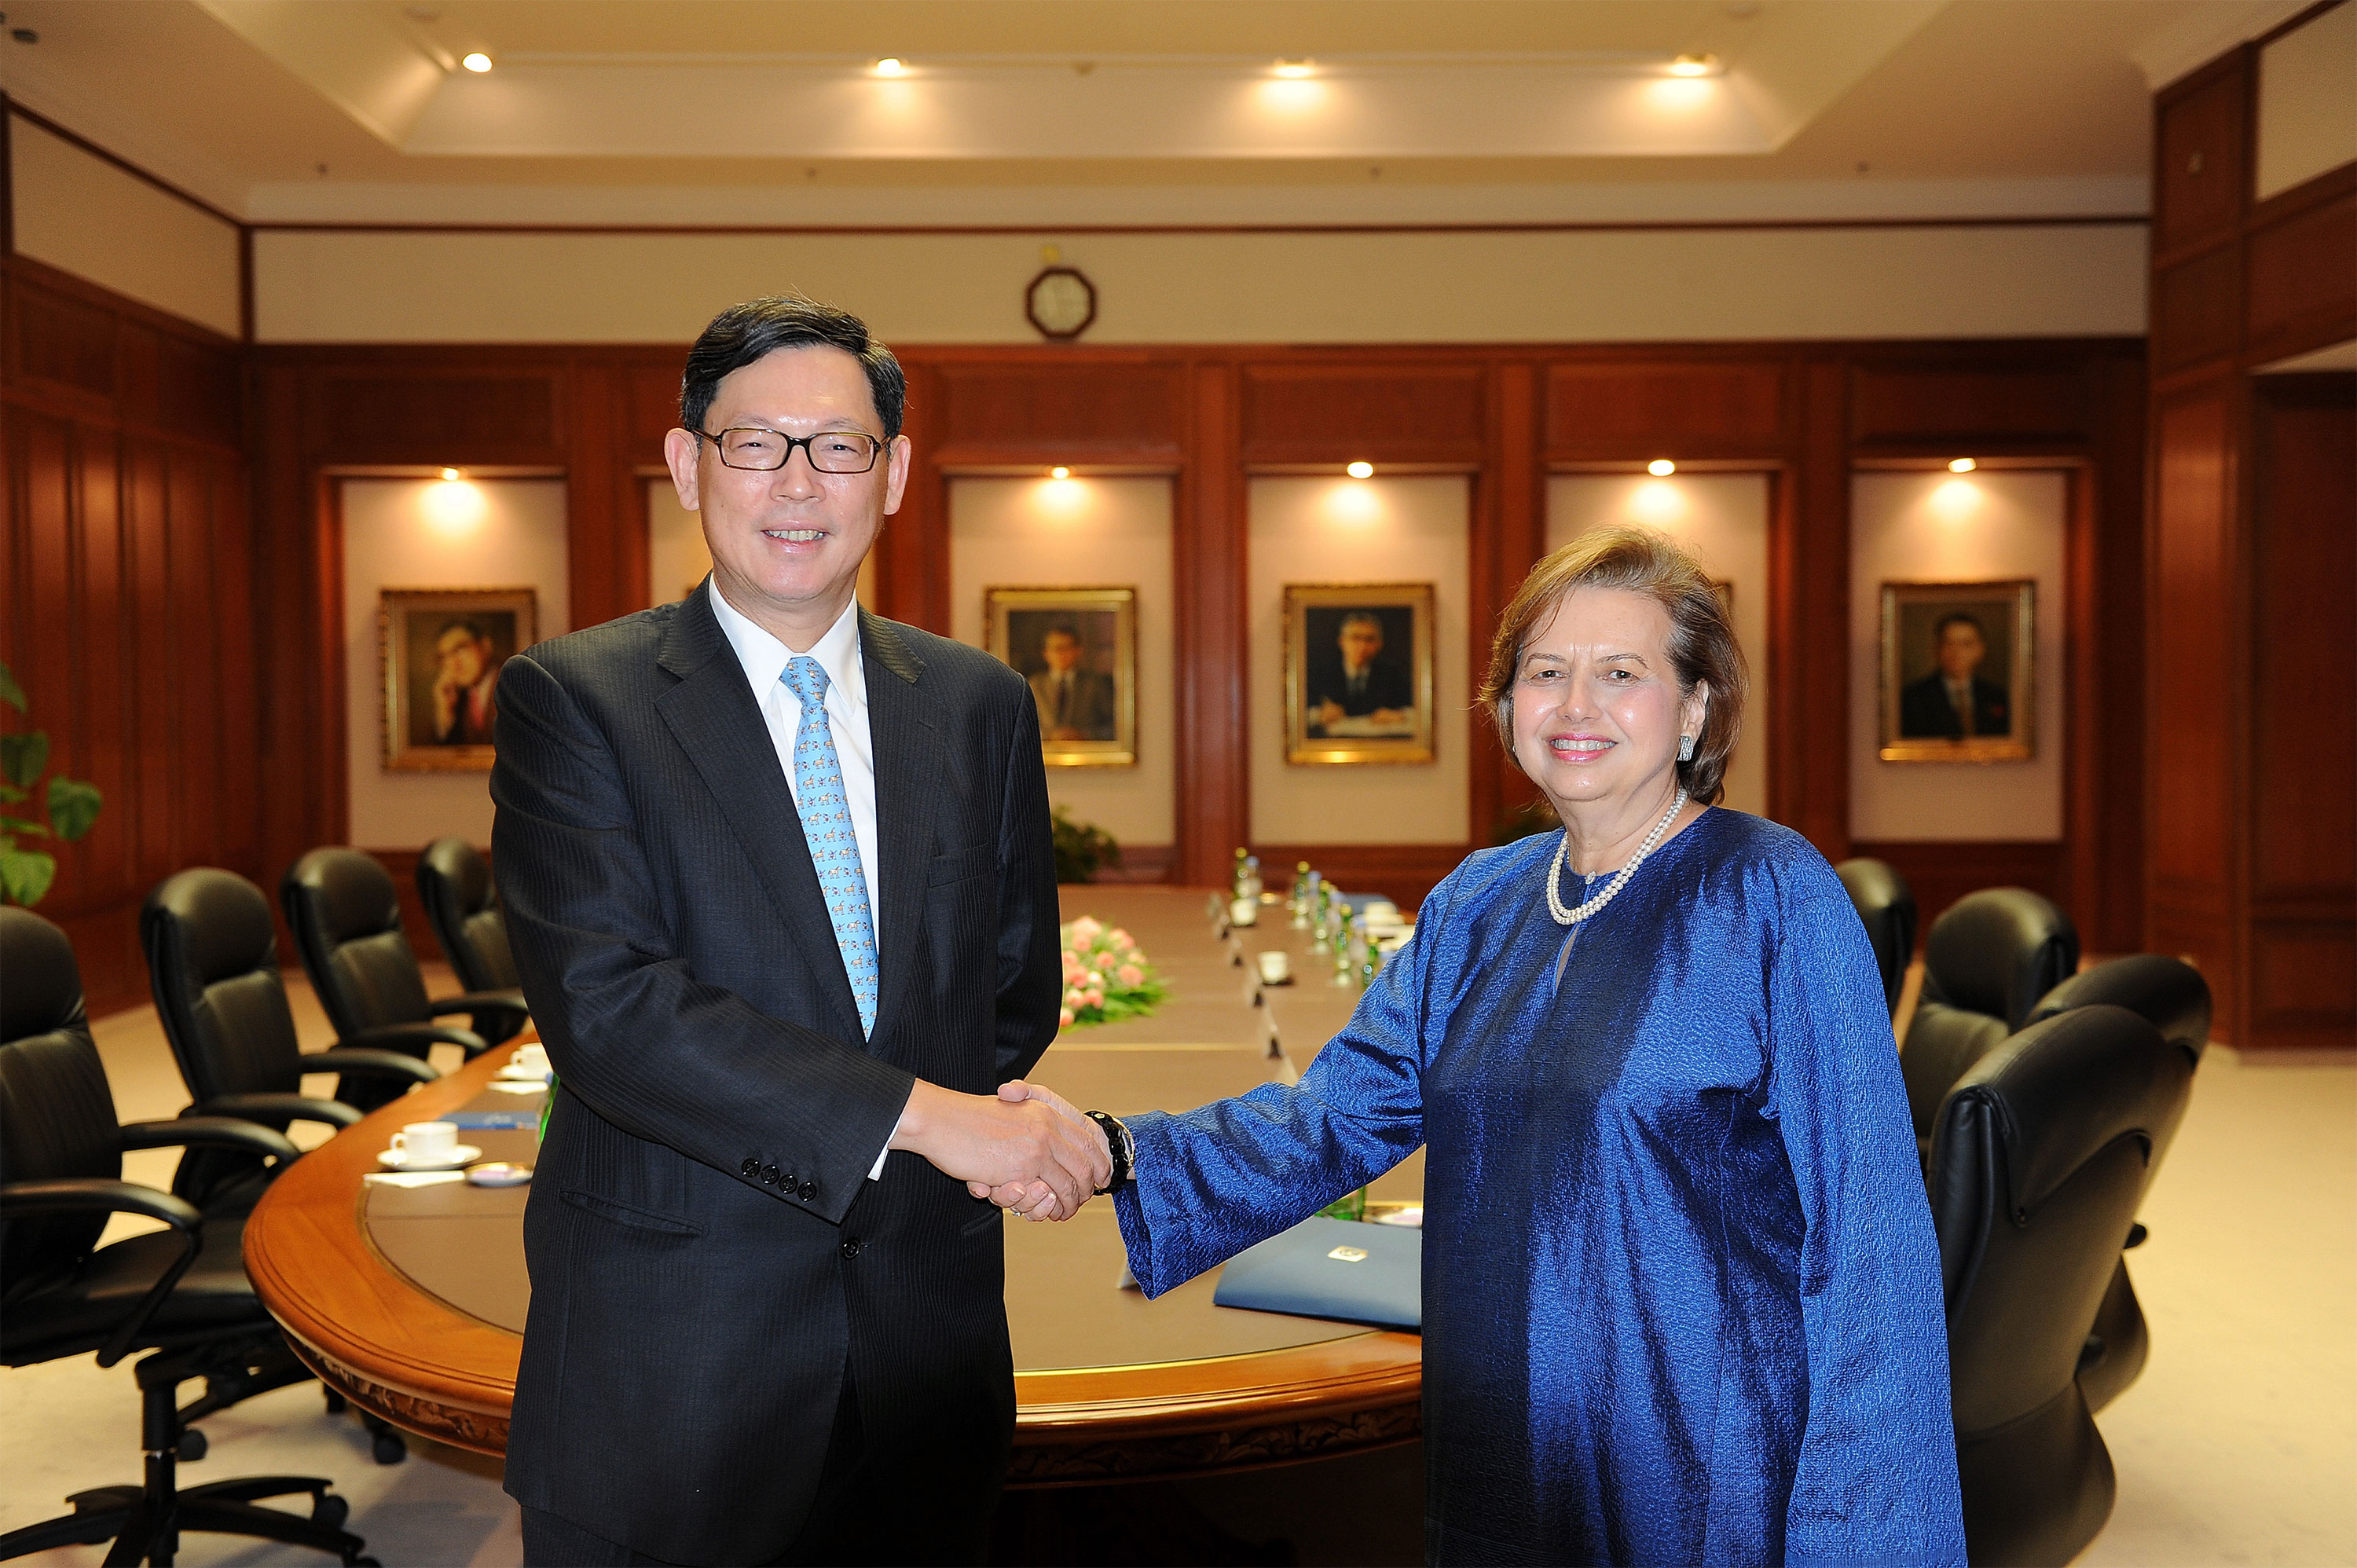 Mr Norman Chan, Chief Executive of Hong Kong Monetary Authority (left), and Dr Zeti Akhtar Aziz, Governor of Bank Negara Malaysia (right), agree to further strengthen financial co-operation of Hong Kong and Malaysia at a bilateral meeting held in Kuala Lumpur.